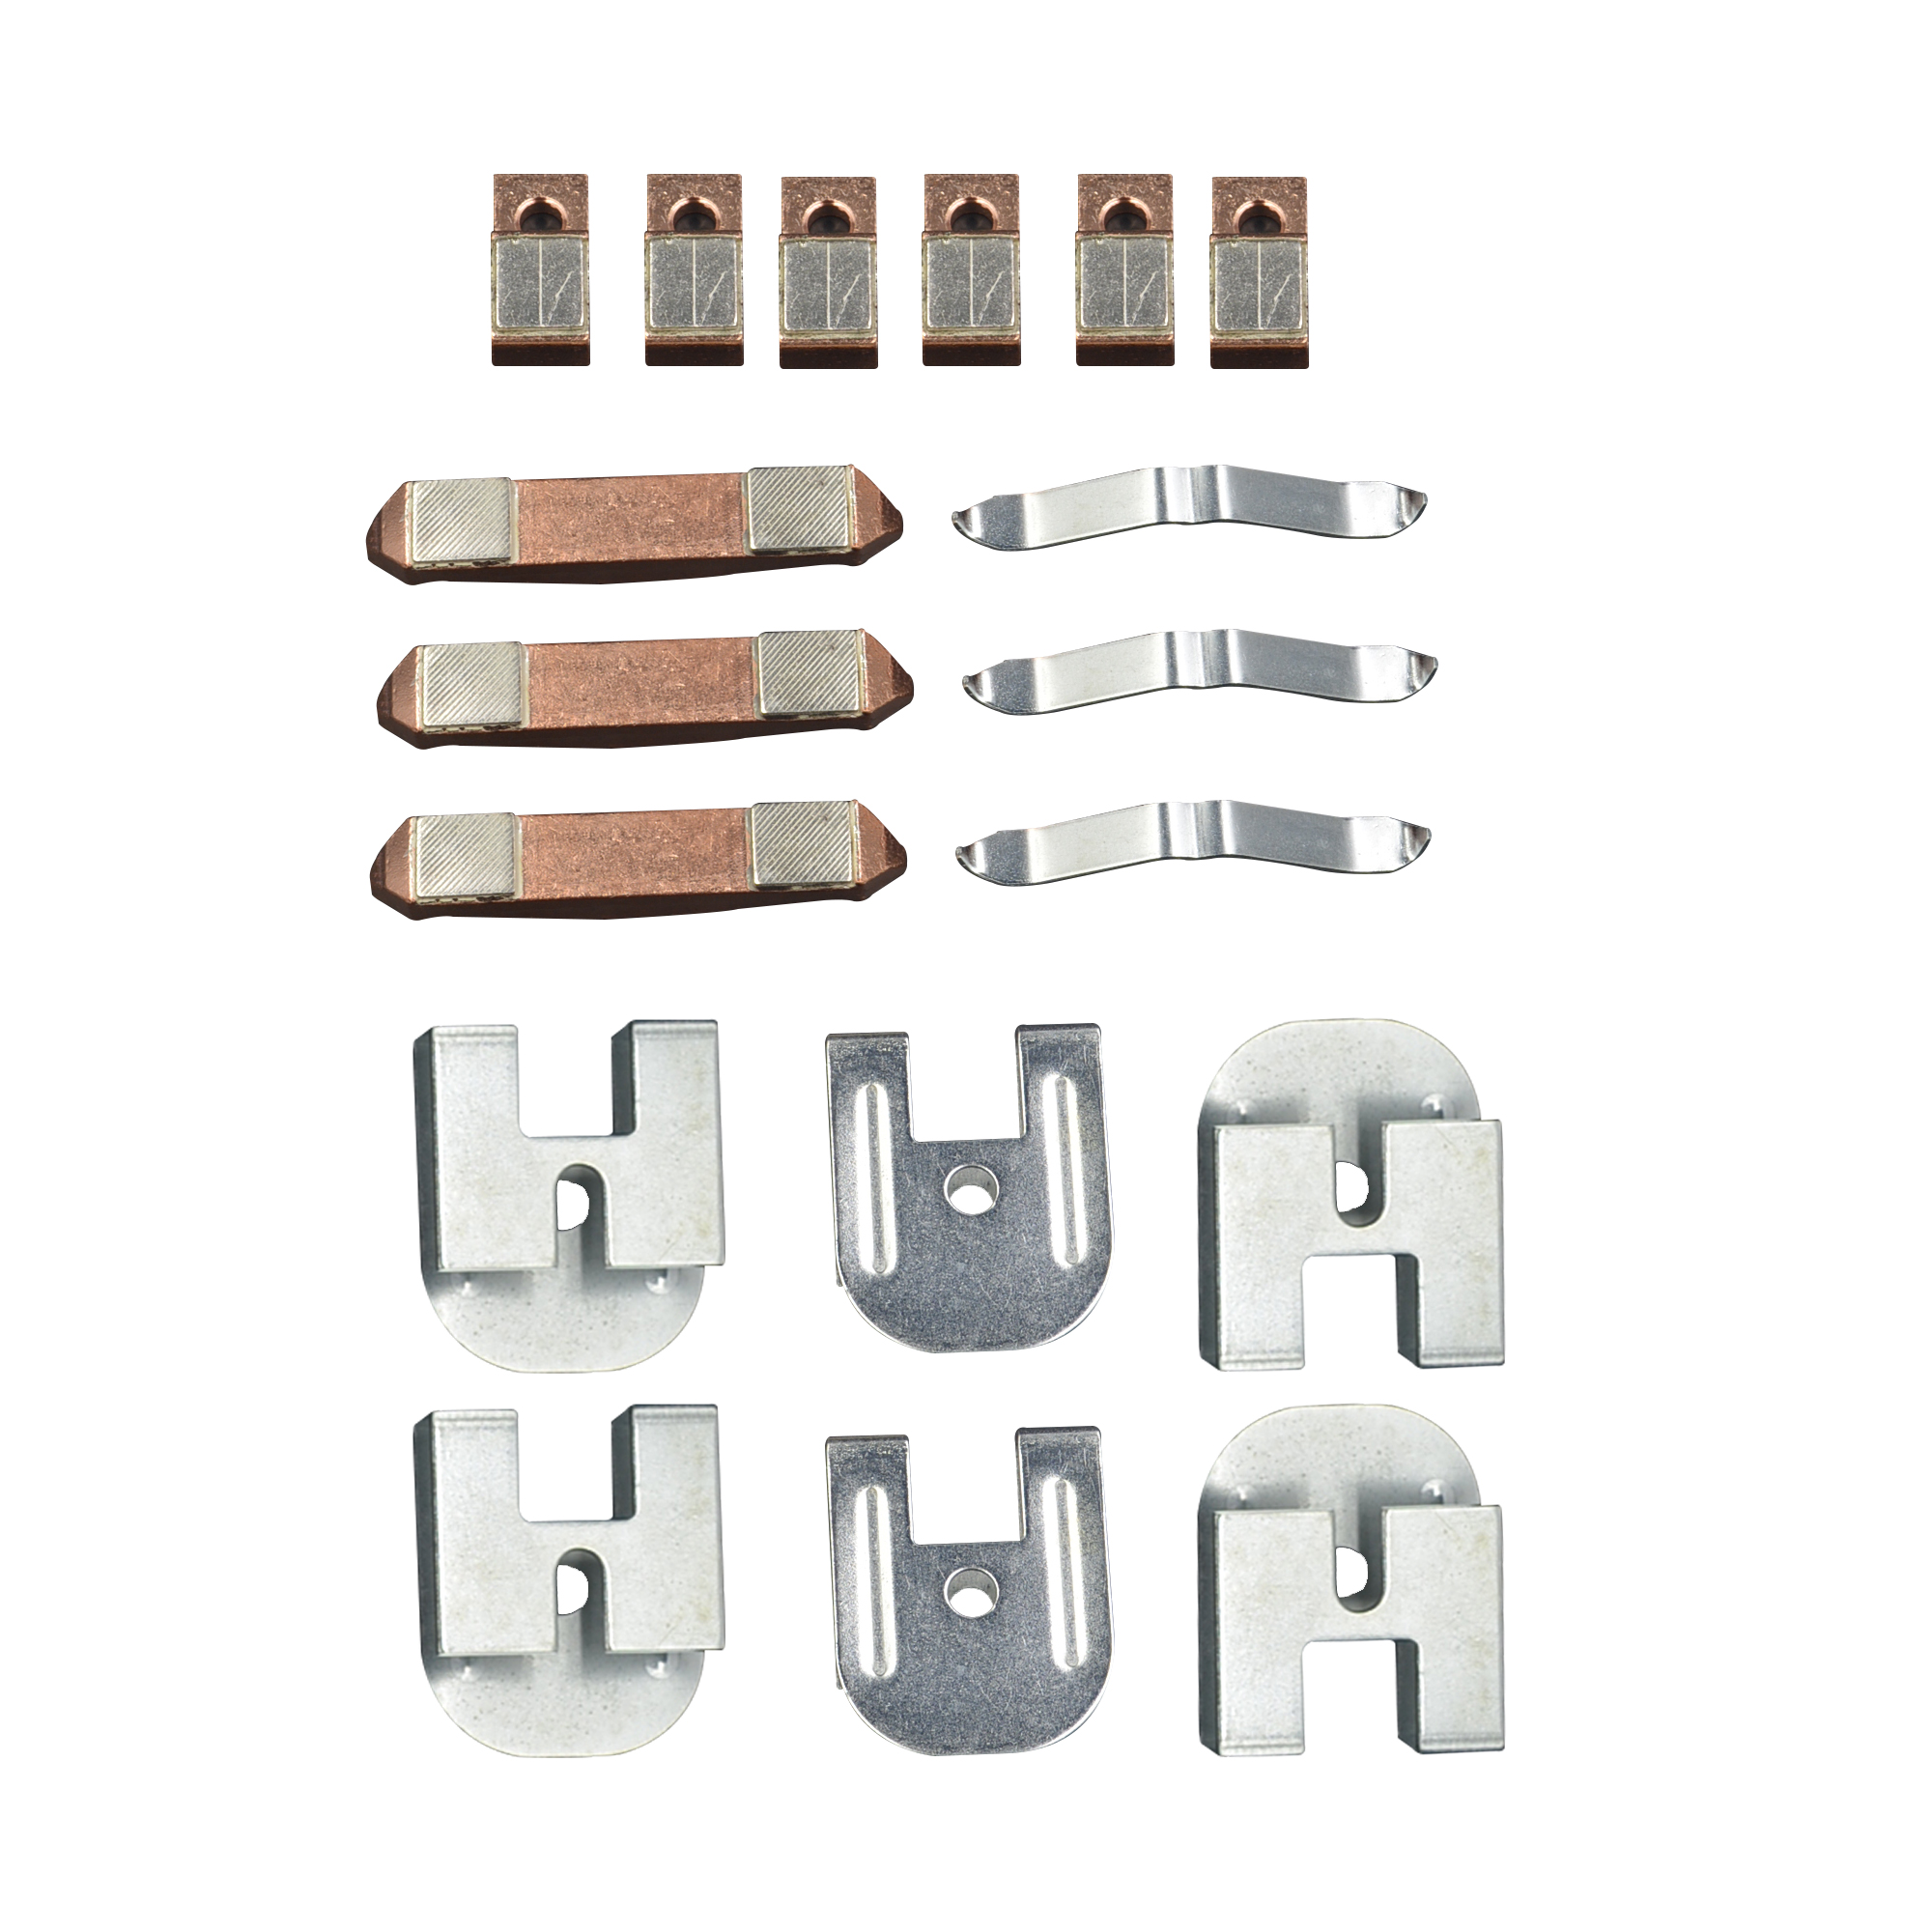 PriceList for Lc1d Contactor Coils -
 Nofuel contact kits ZL460 for the Siemens ABB AF460 contactor – Simply Buy